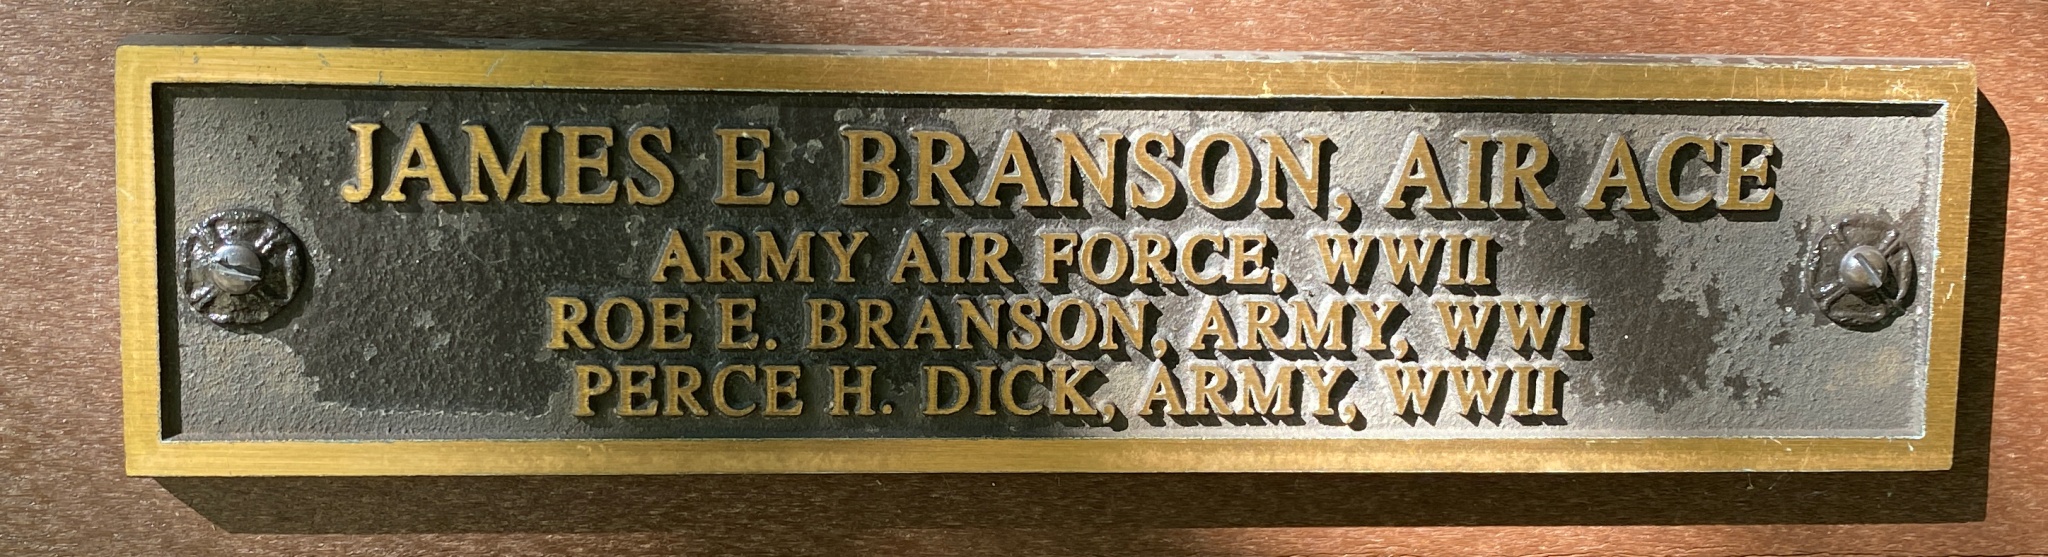 JAMES E. BRANSON, AIR ACE ARMY Air Force, WWII ROE E. BRANSON, ARMY, WWII PERCE H. DICK, ARMY, WWII